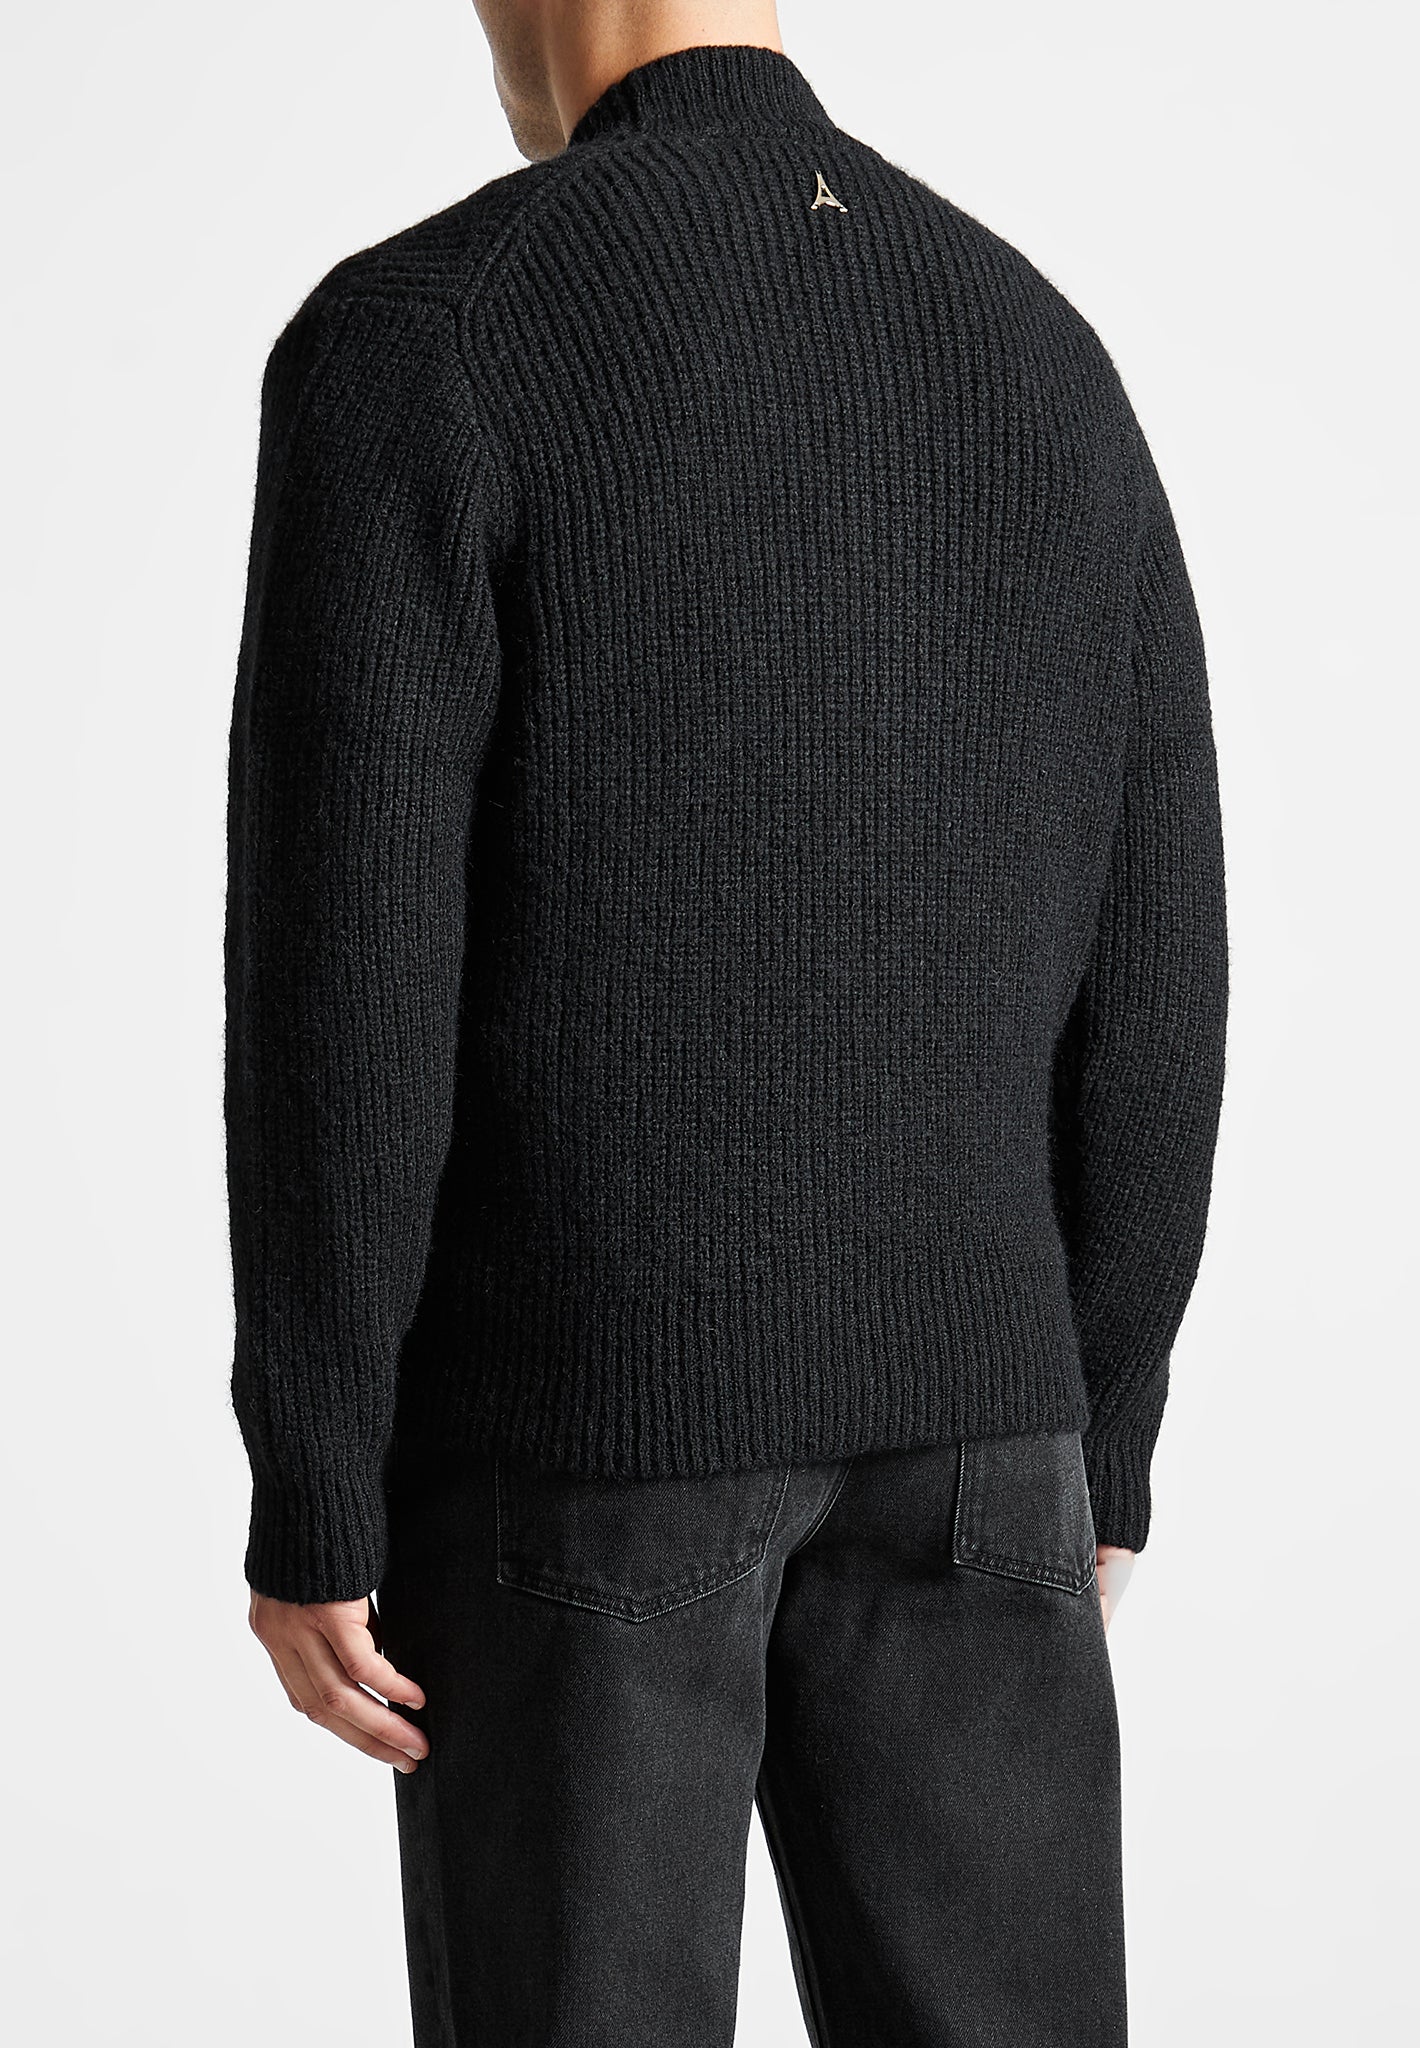 Double-breasted Knit cardigan / Black